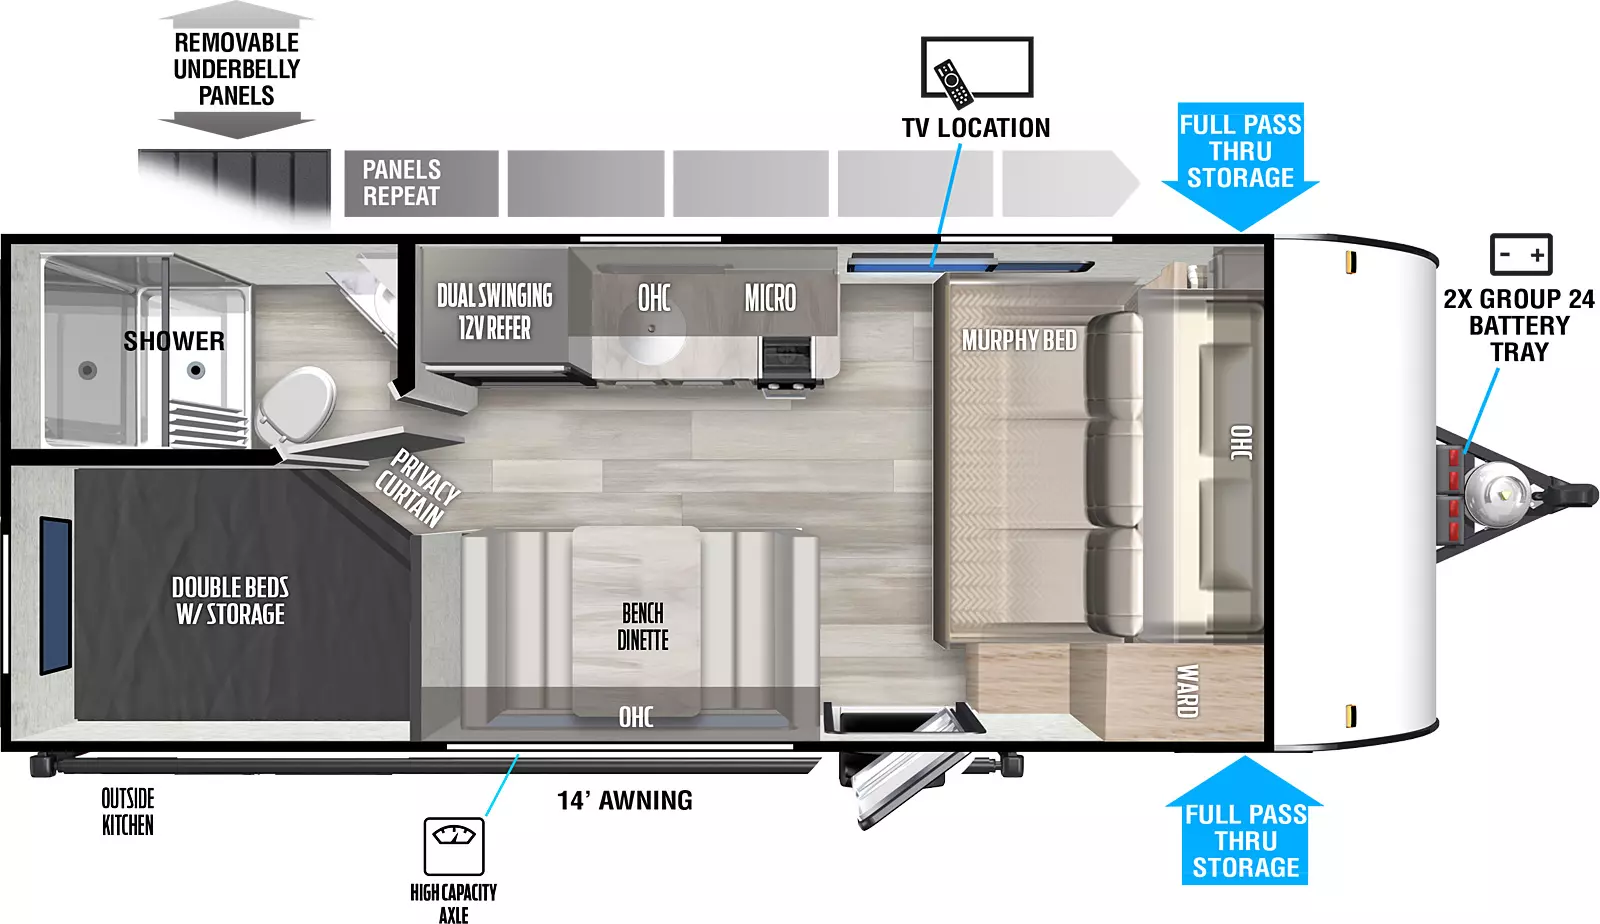 The 179DBK has zero slideouts and one entry. Exterior features removeable underbelly panels, front pass-thru storage, outside kitchen, high capacity axle, 14 foot awning, and front 2X group 24 battery tray. Interior layout front to back: murphy bed with overhead cabinet, off-door side TV, and door side wardrobe; door side entry and bench dinette with overhead cabinet; off-door side kitchen counter with cooktop and sink, microwave, overhead cabinet, and dual swinging 12V refrigerator; rear door side double beds with storage and privacy curtain; rear off-door side full bathroom.